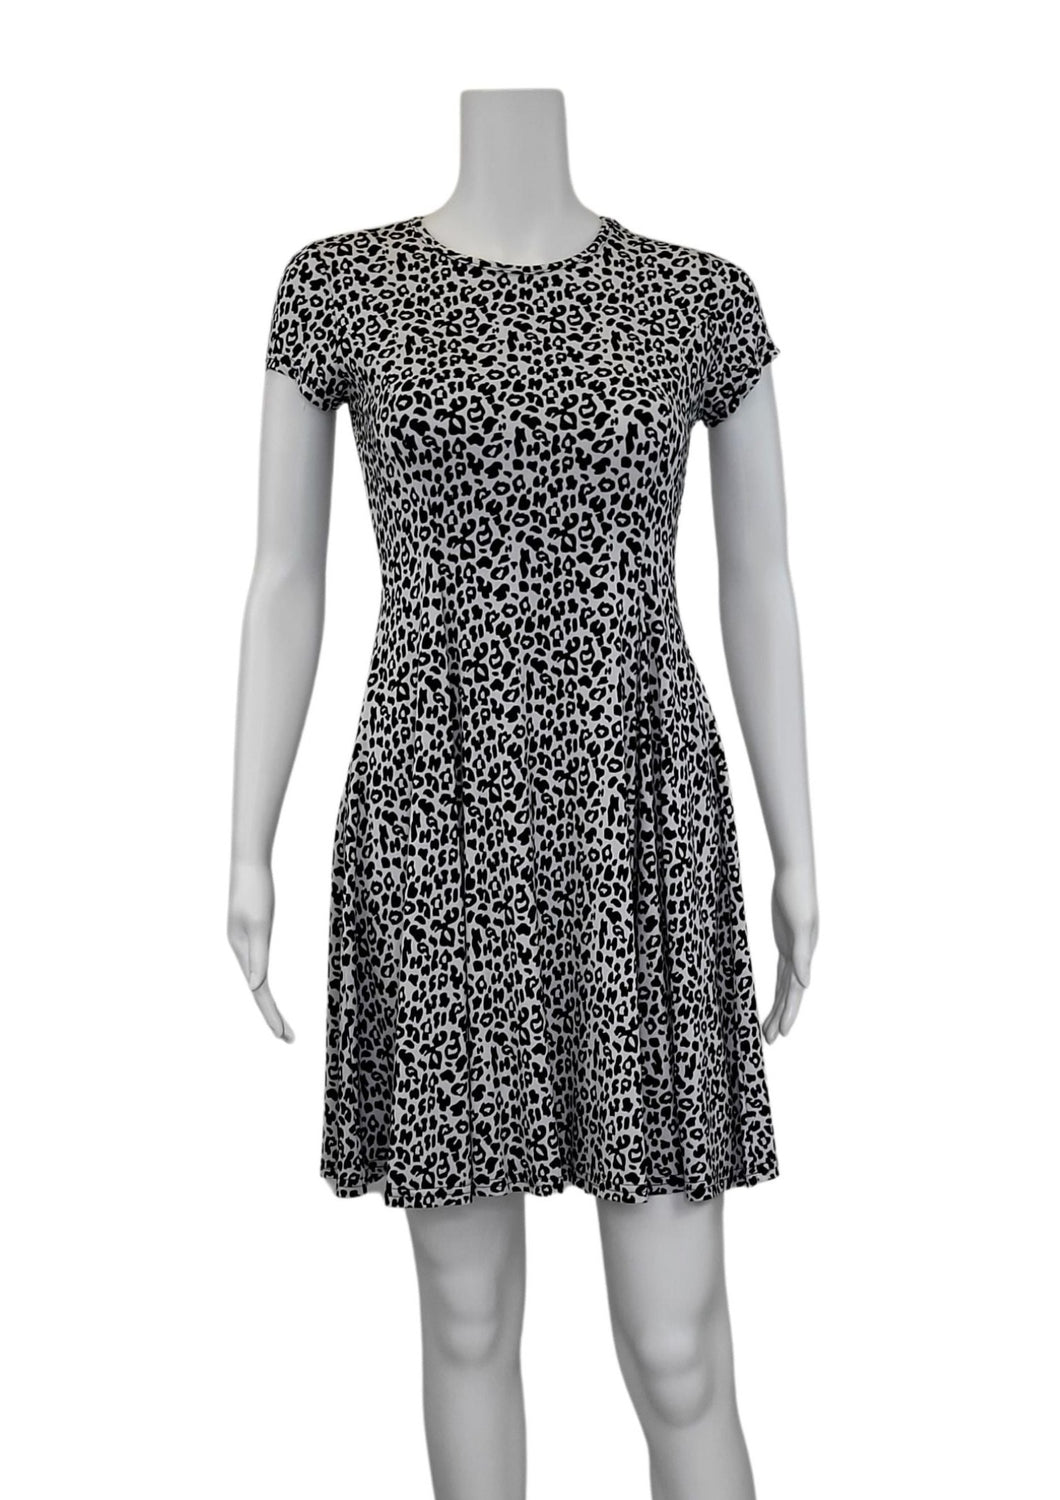  The ﻿Leopard Print Bamboo Swing Dress is a simple and elegant style with a luxurious look and feel. A compliment to all body shapes with its princess line fit, round neck and short sleeve. Proudly made in Canada 92% rayon from bamboo 8% Spandex  Eco-Essentials leopard print $75.00